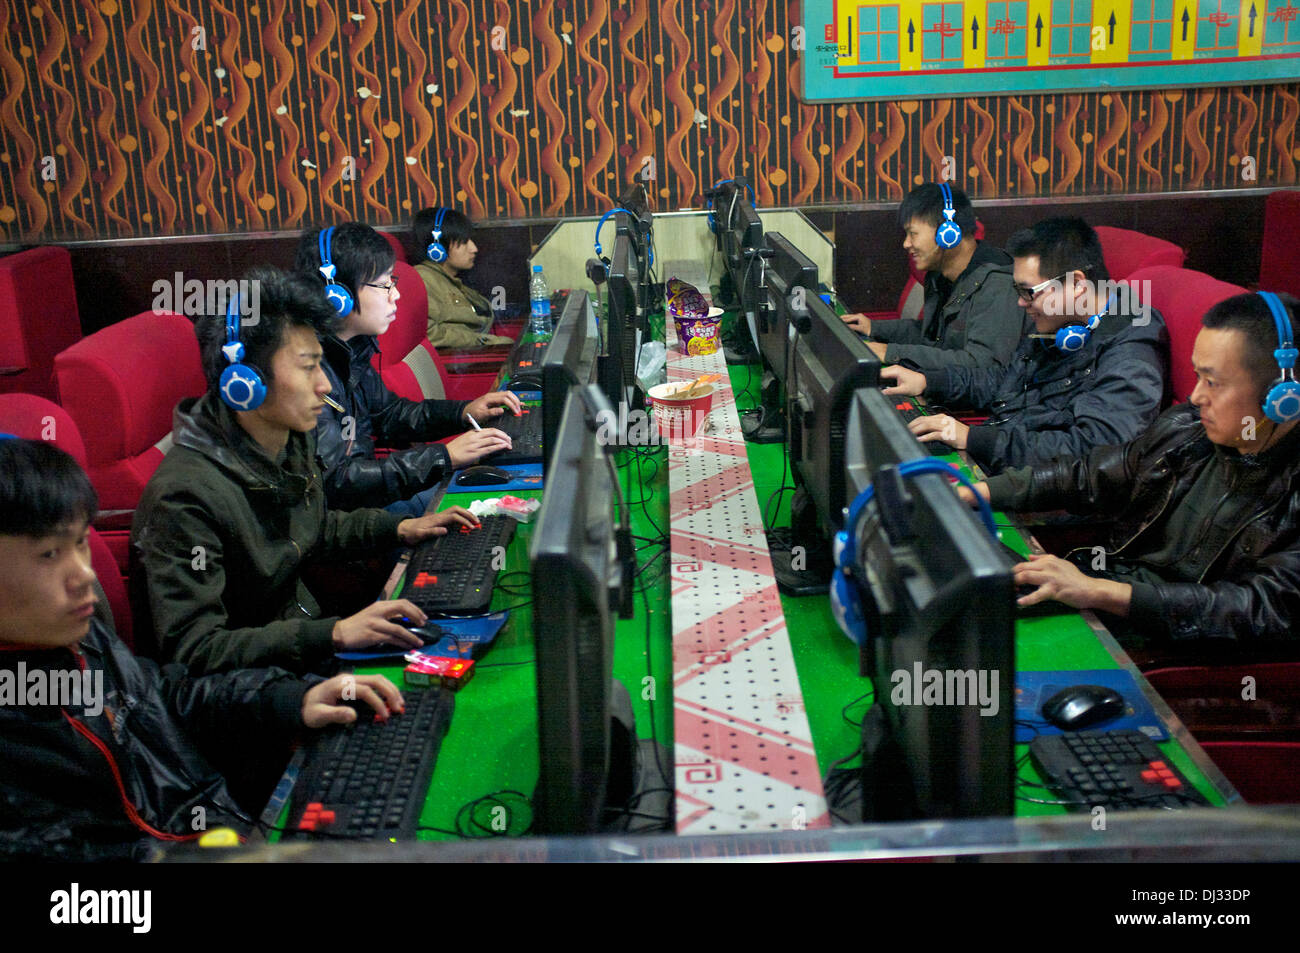 An internet cafe in Beijing, China. 2013 Stock Photo